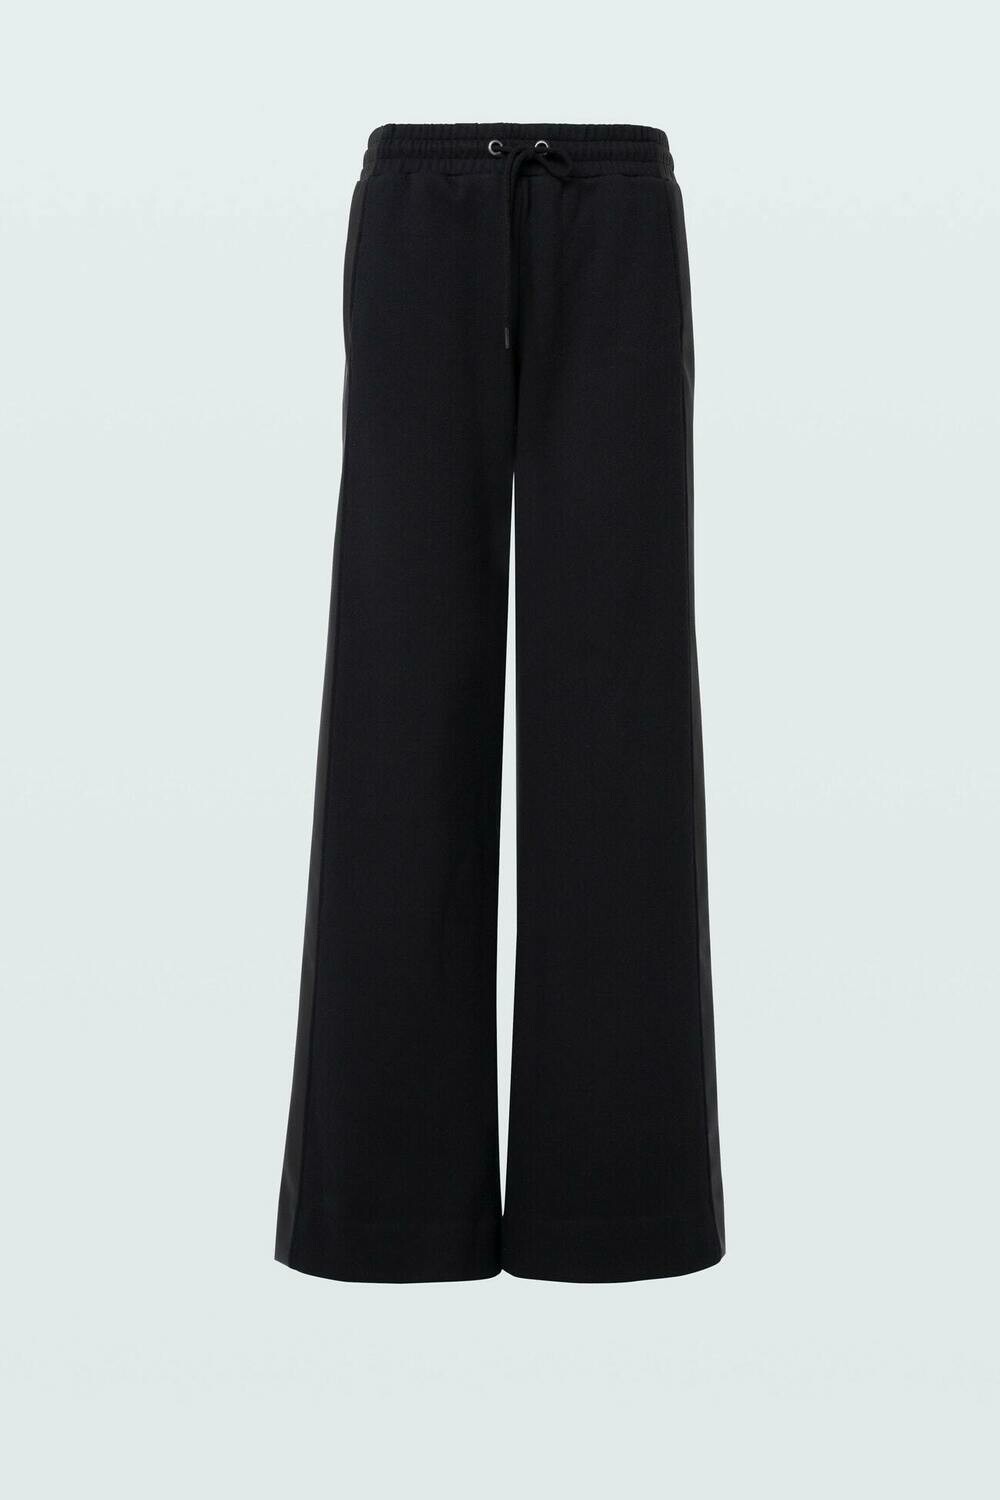 Dorothee Schumacher Hose CASUAL COOLNESS